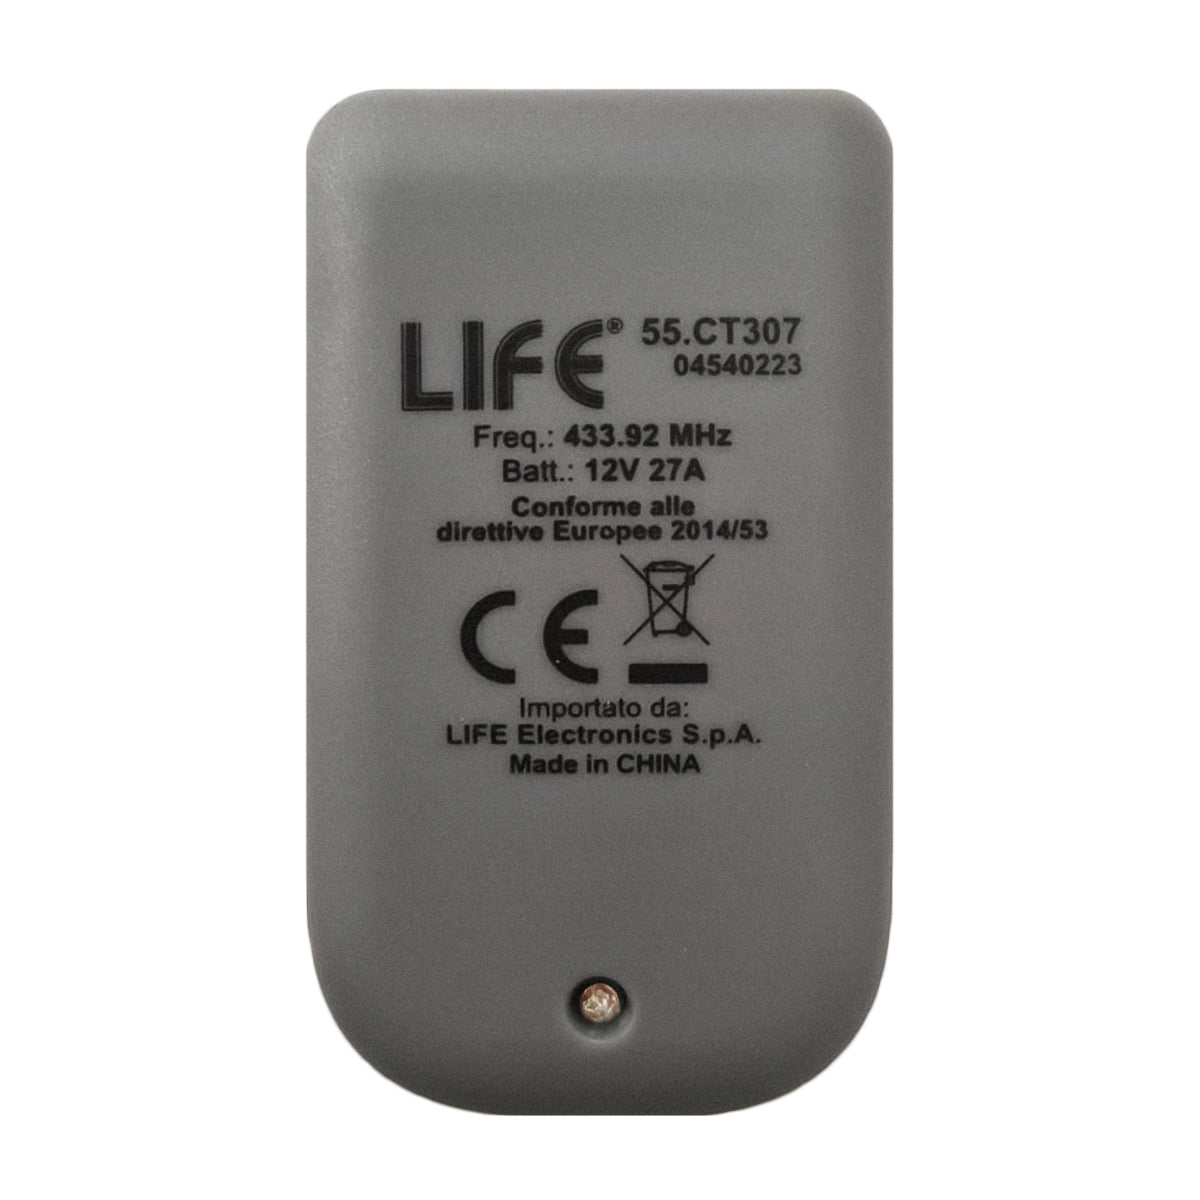 LIFE Rolling code remote control, fixed frequency 433.92 MHz, programmable self-learning gate opener, 2 independent memories, duplicates up to 8 programs